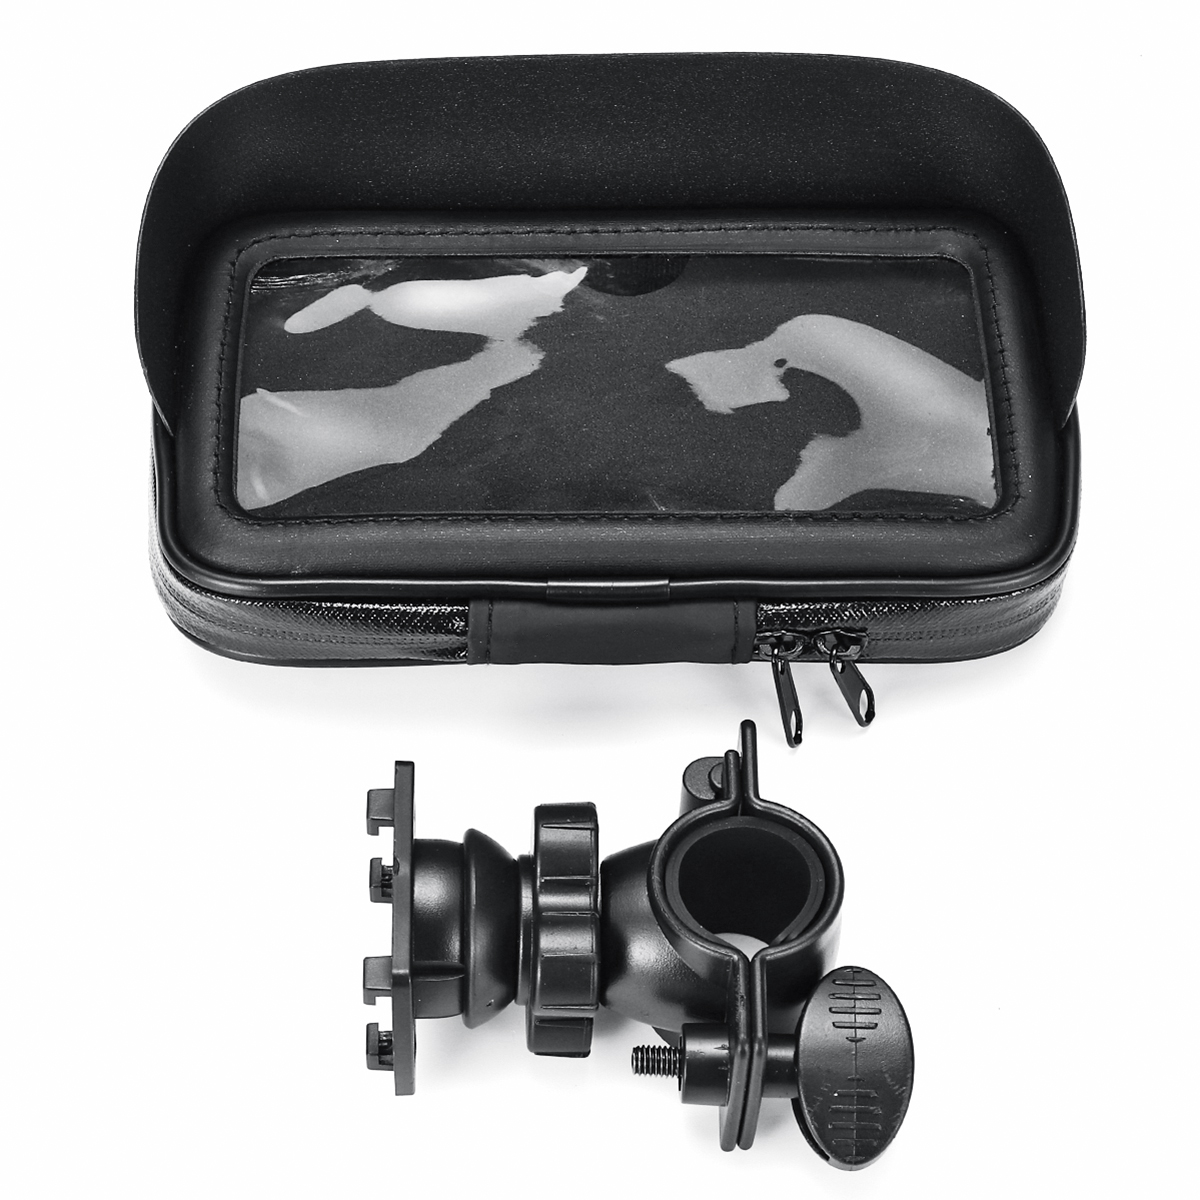 4.7Inch Waterproof Mobile Phone Holder Motorcycle Bicycle Mount Case Bag Pouch